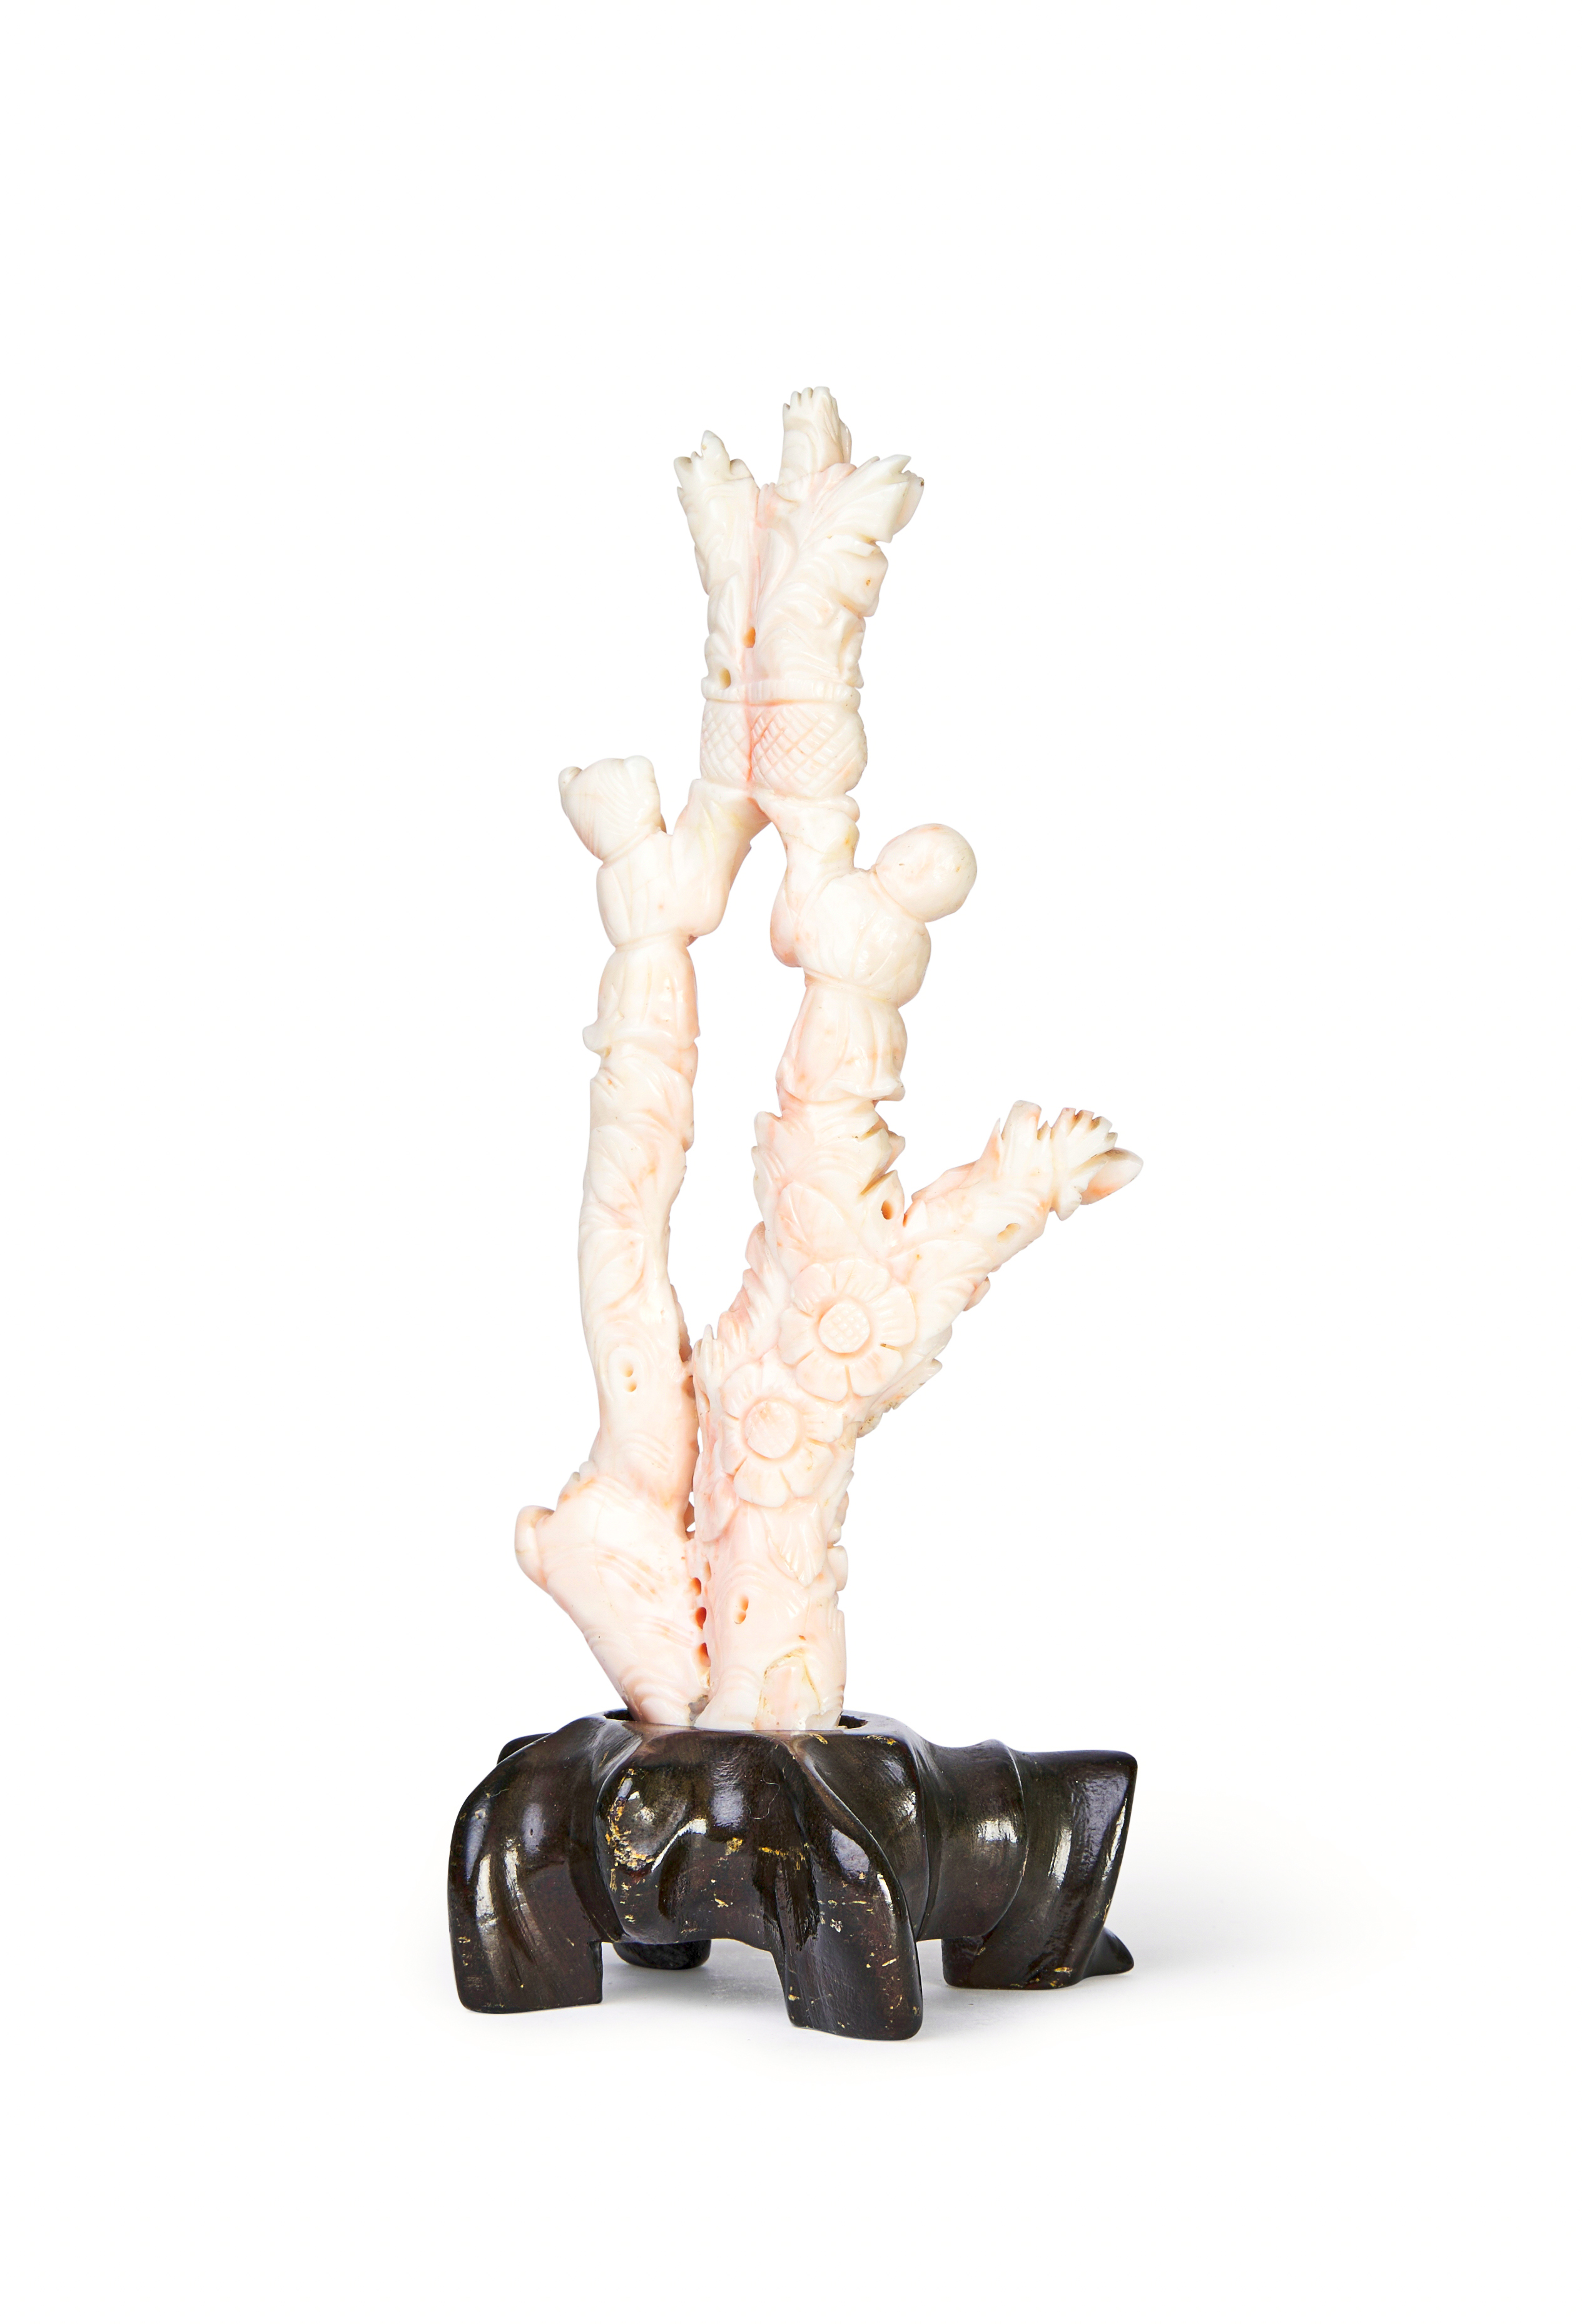 A RARE CHINESE PINK CORAL FIGURE DEPICTING BOYS ON A TREE WITH BIRDS, QING DYNASTY (1644-1911) - Image 4 of 4